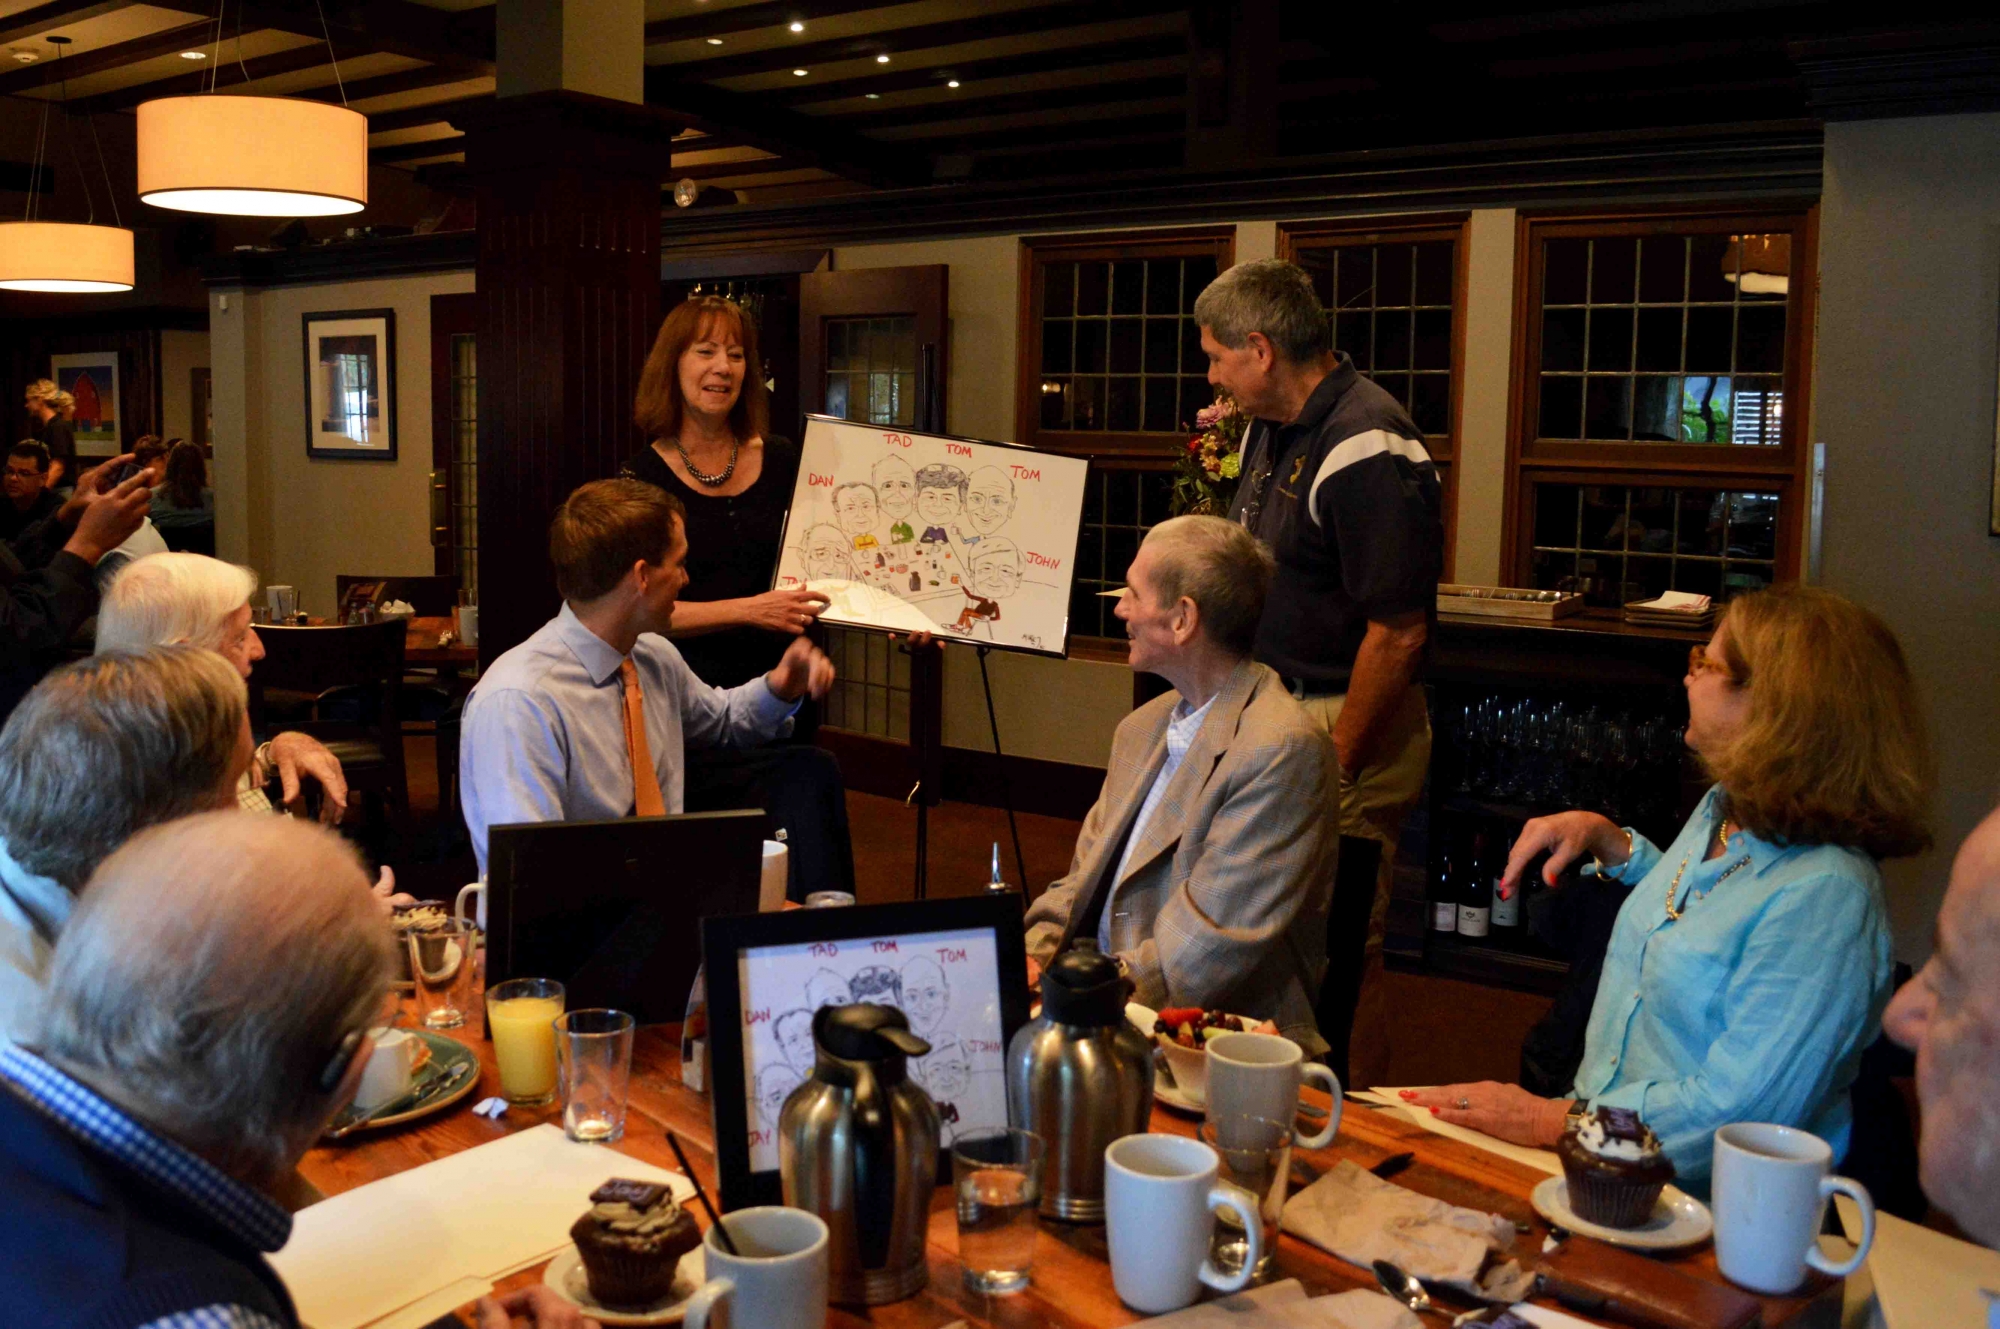 The National Exemplar's Lisa Hopkins presents the group with a caricature made just for them.